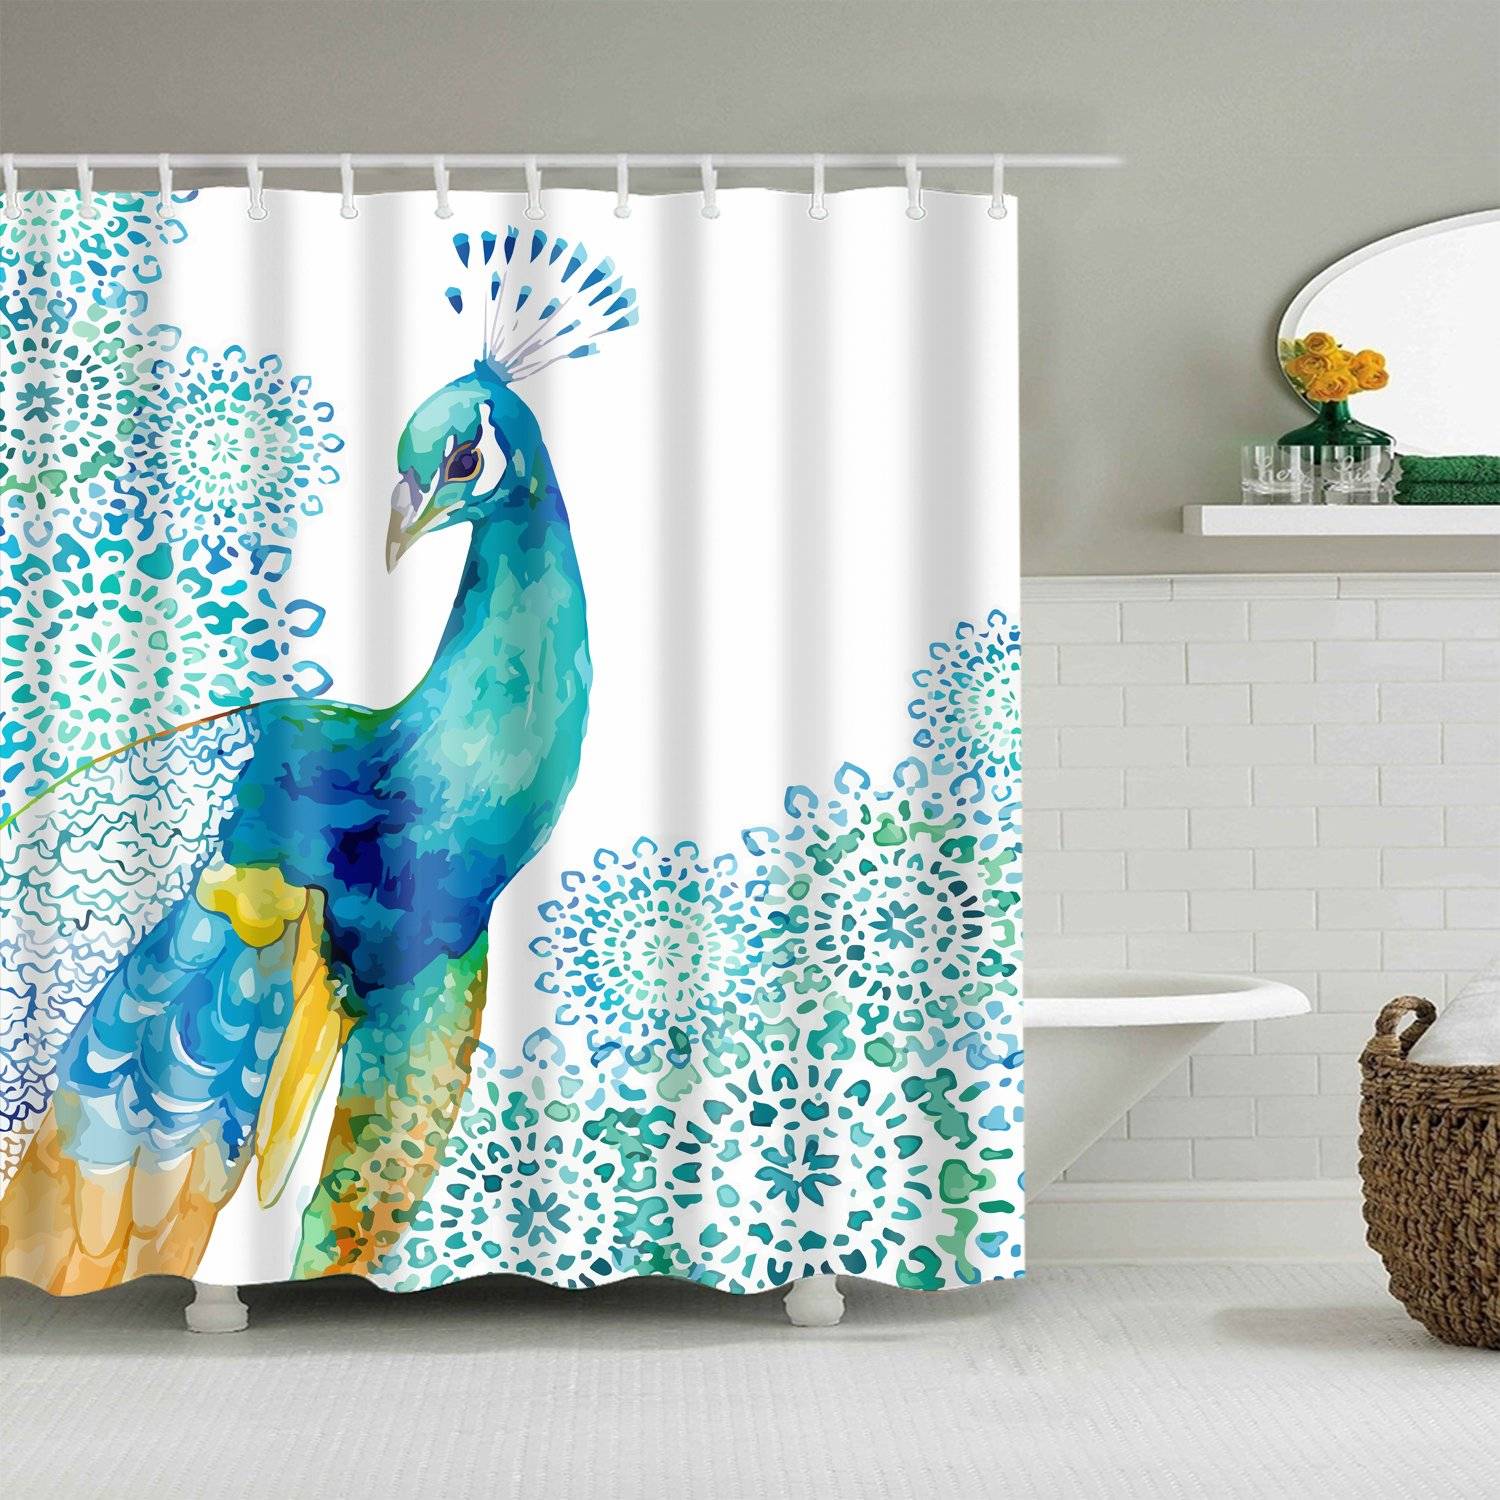 Watercolor Bird Painting with Floral Peacock Blue Shower Curtain